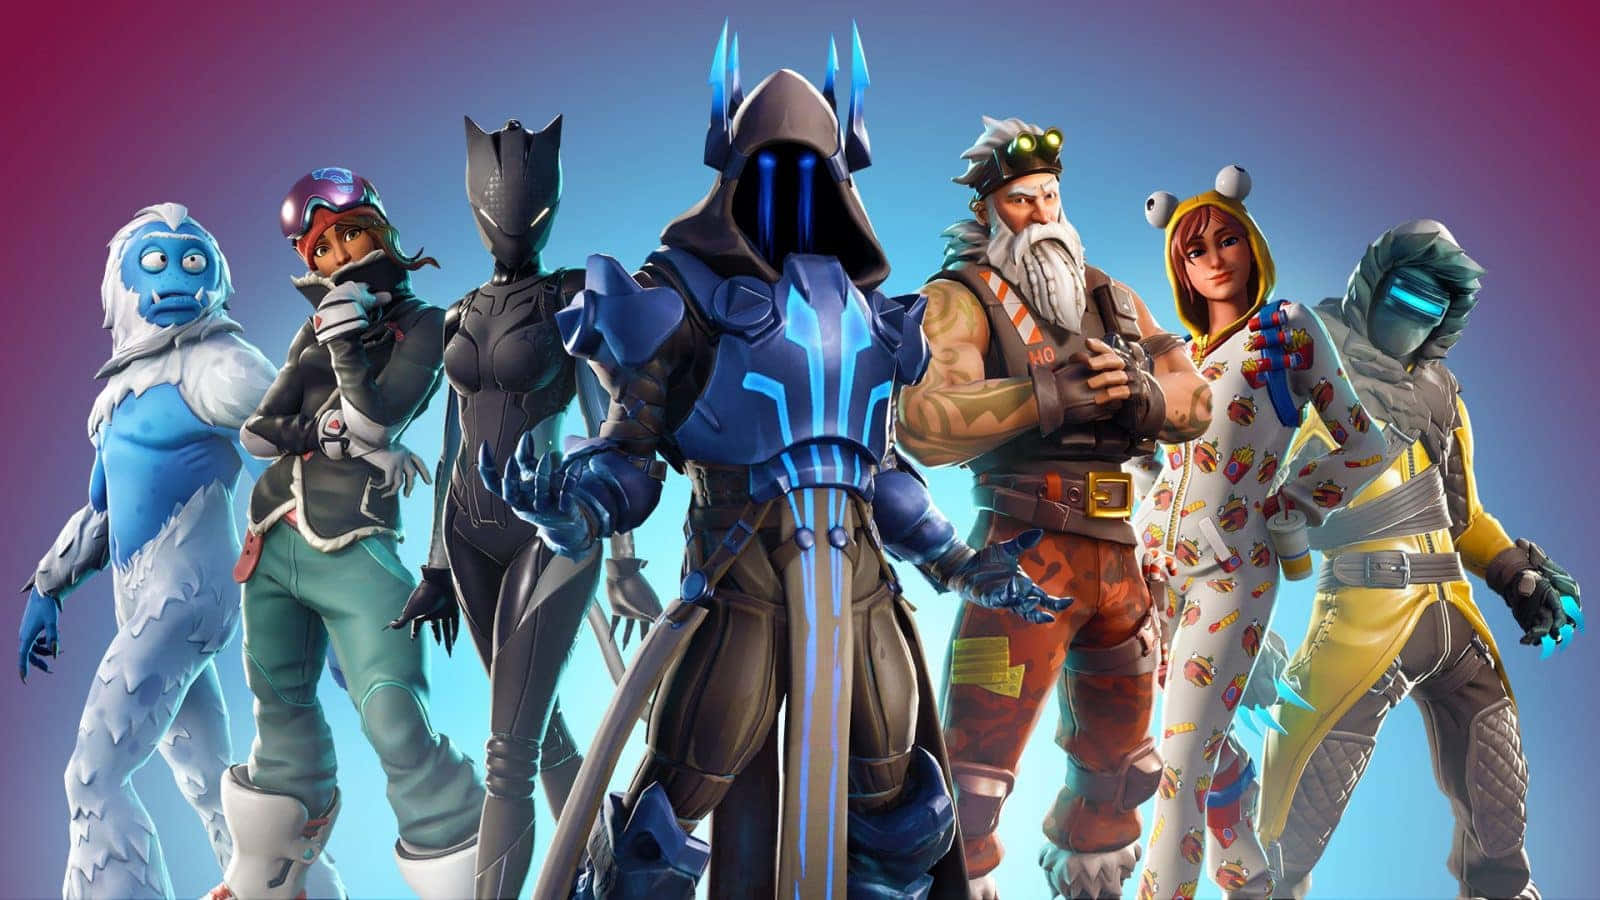 Download Funny Fortnite Skins Picture | Wallpapers.com